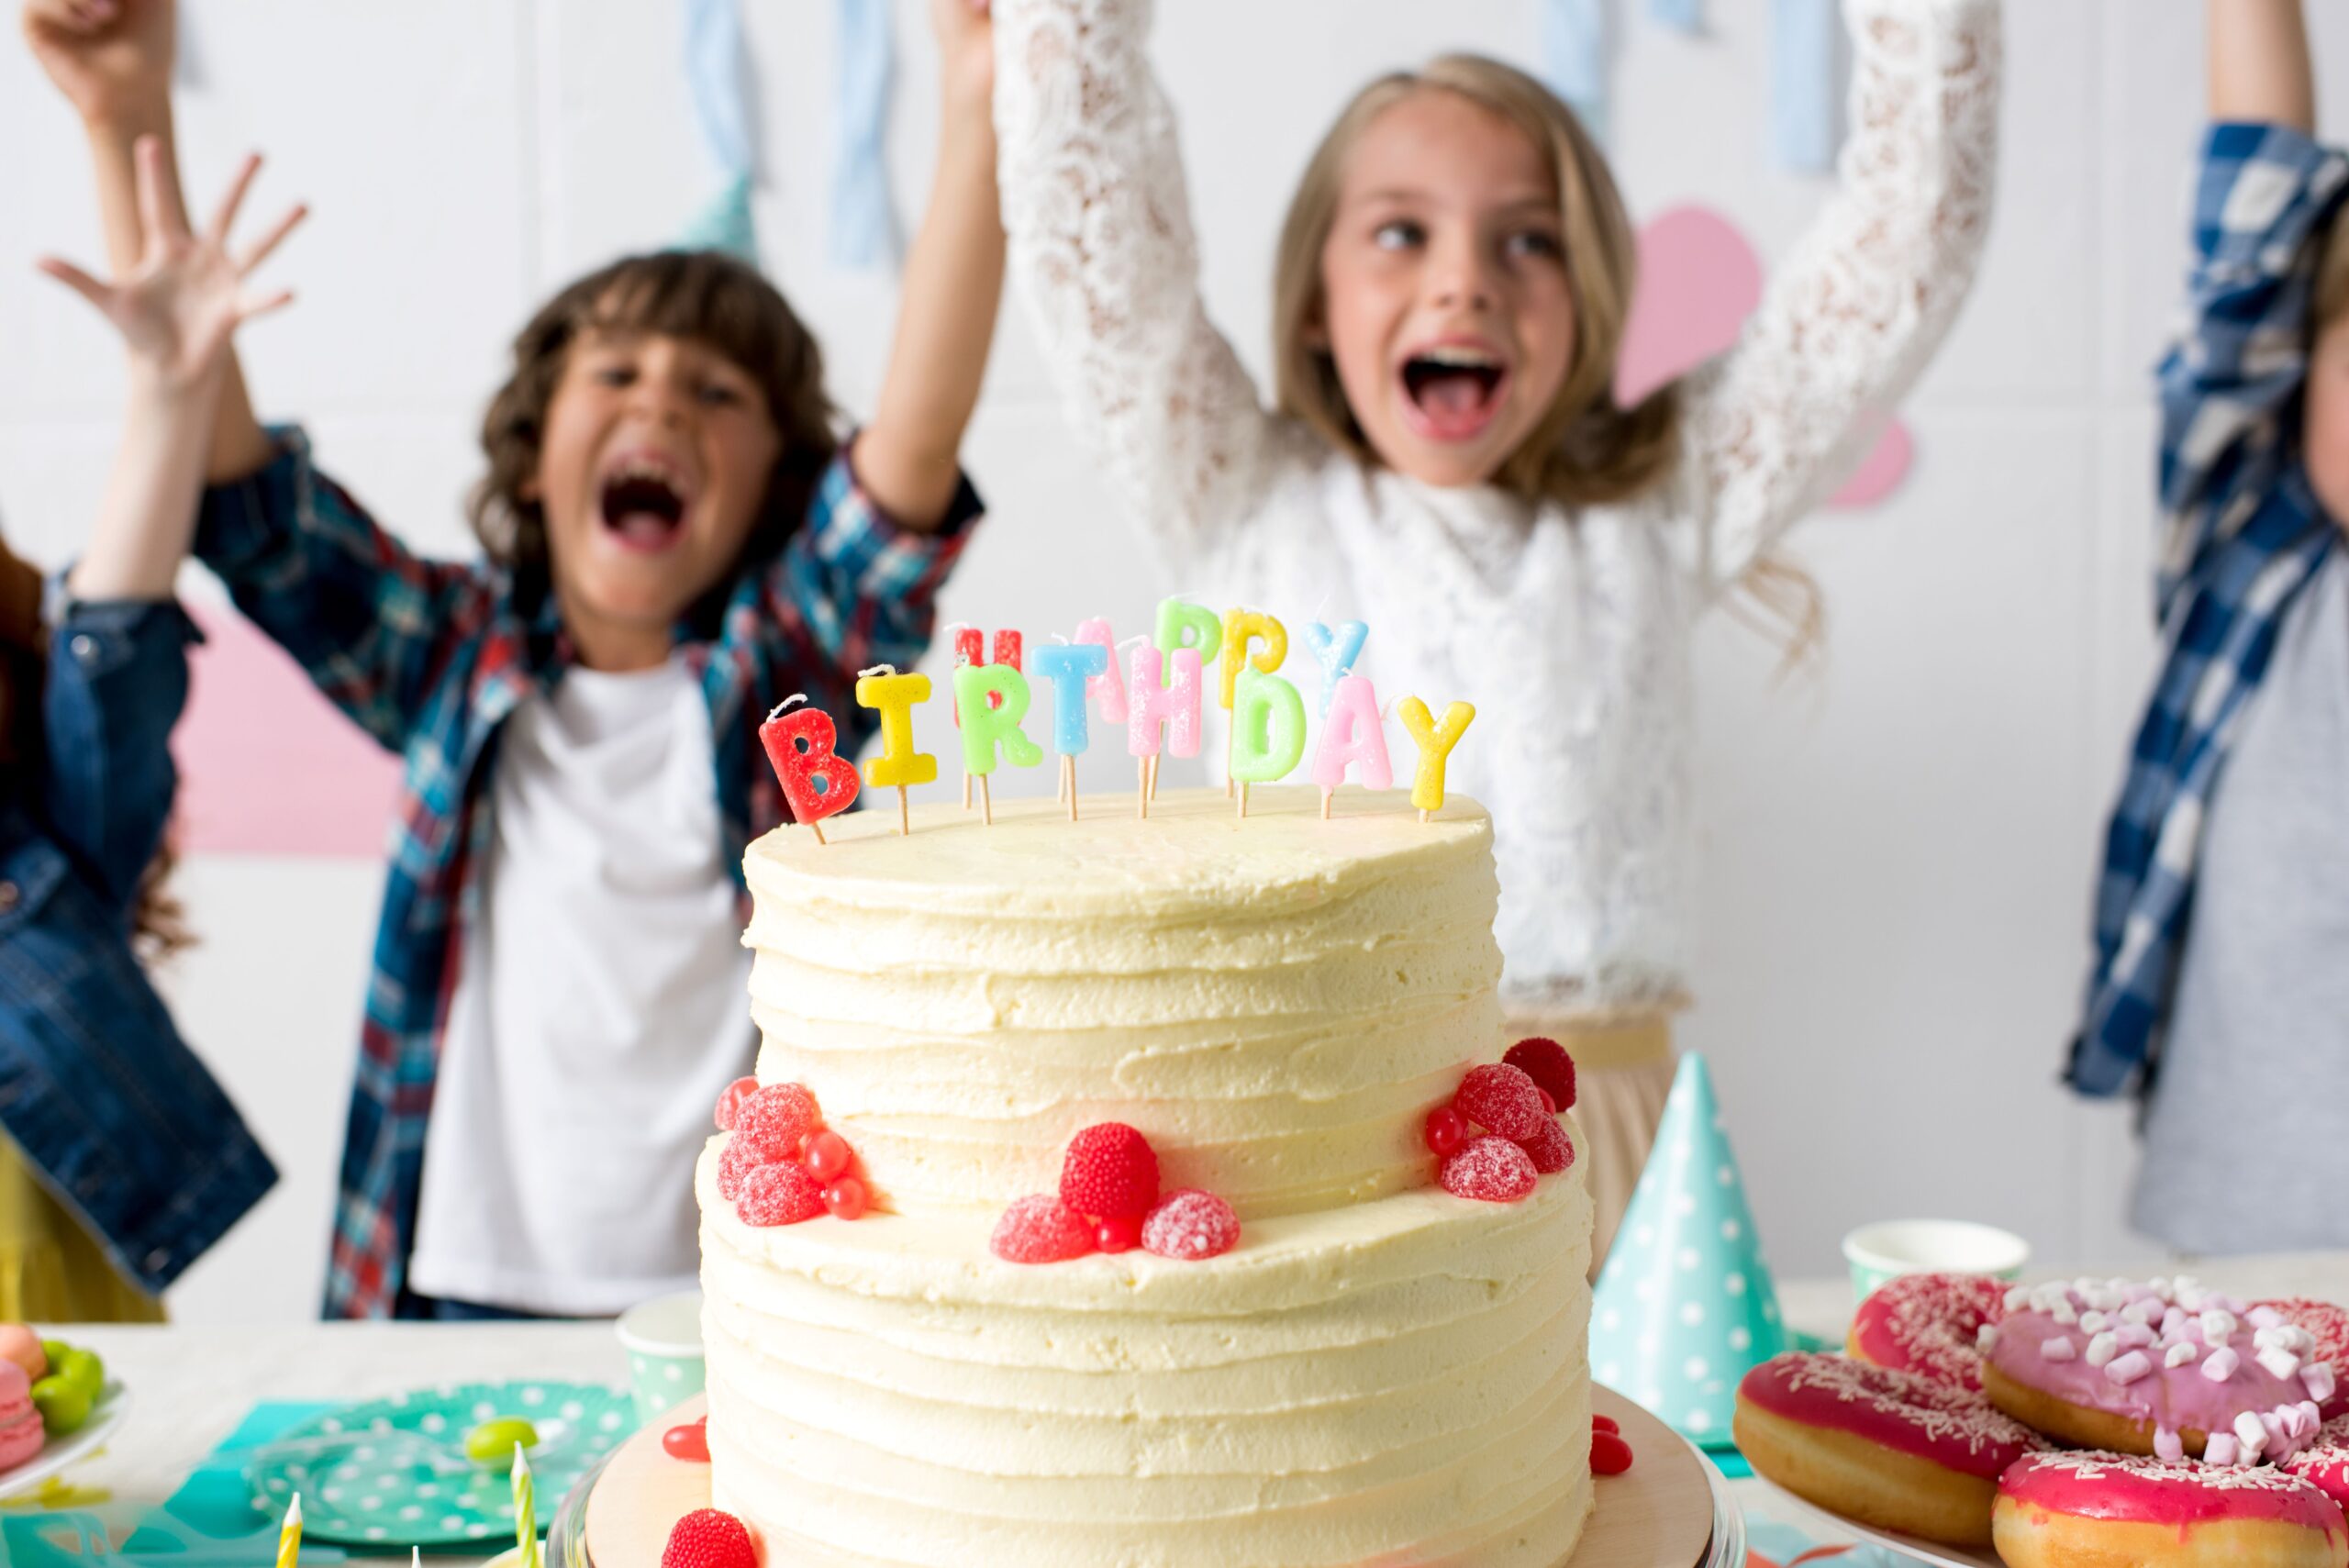 Kids celebrate with cake at Birthday party